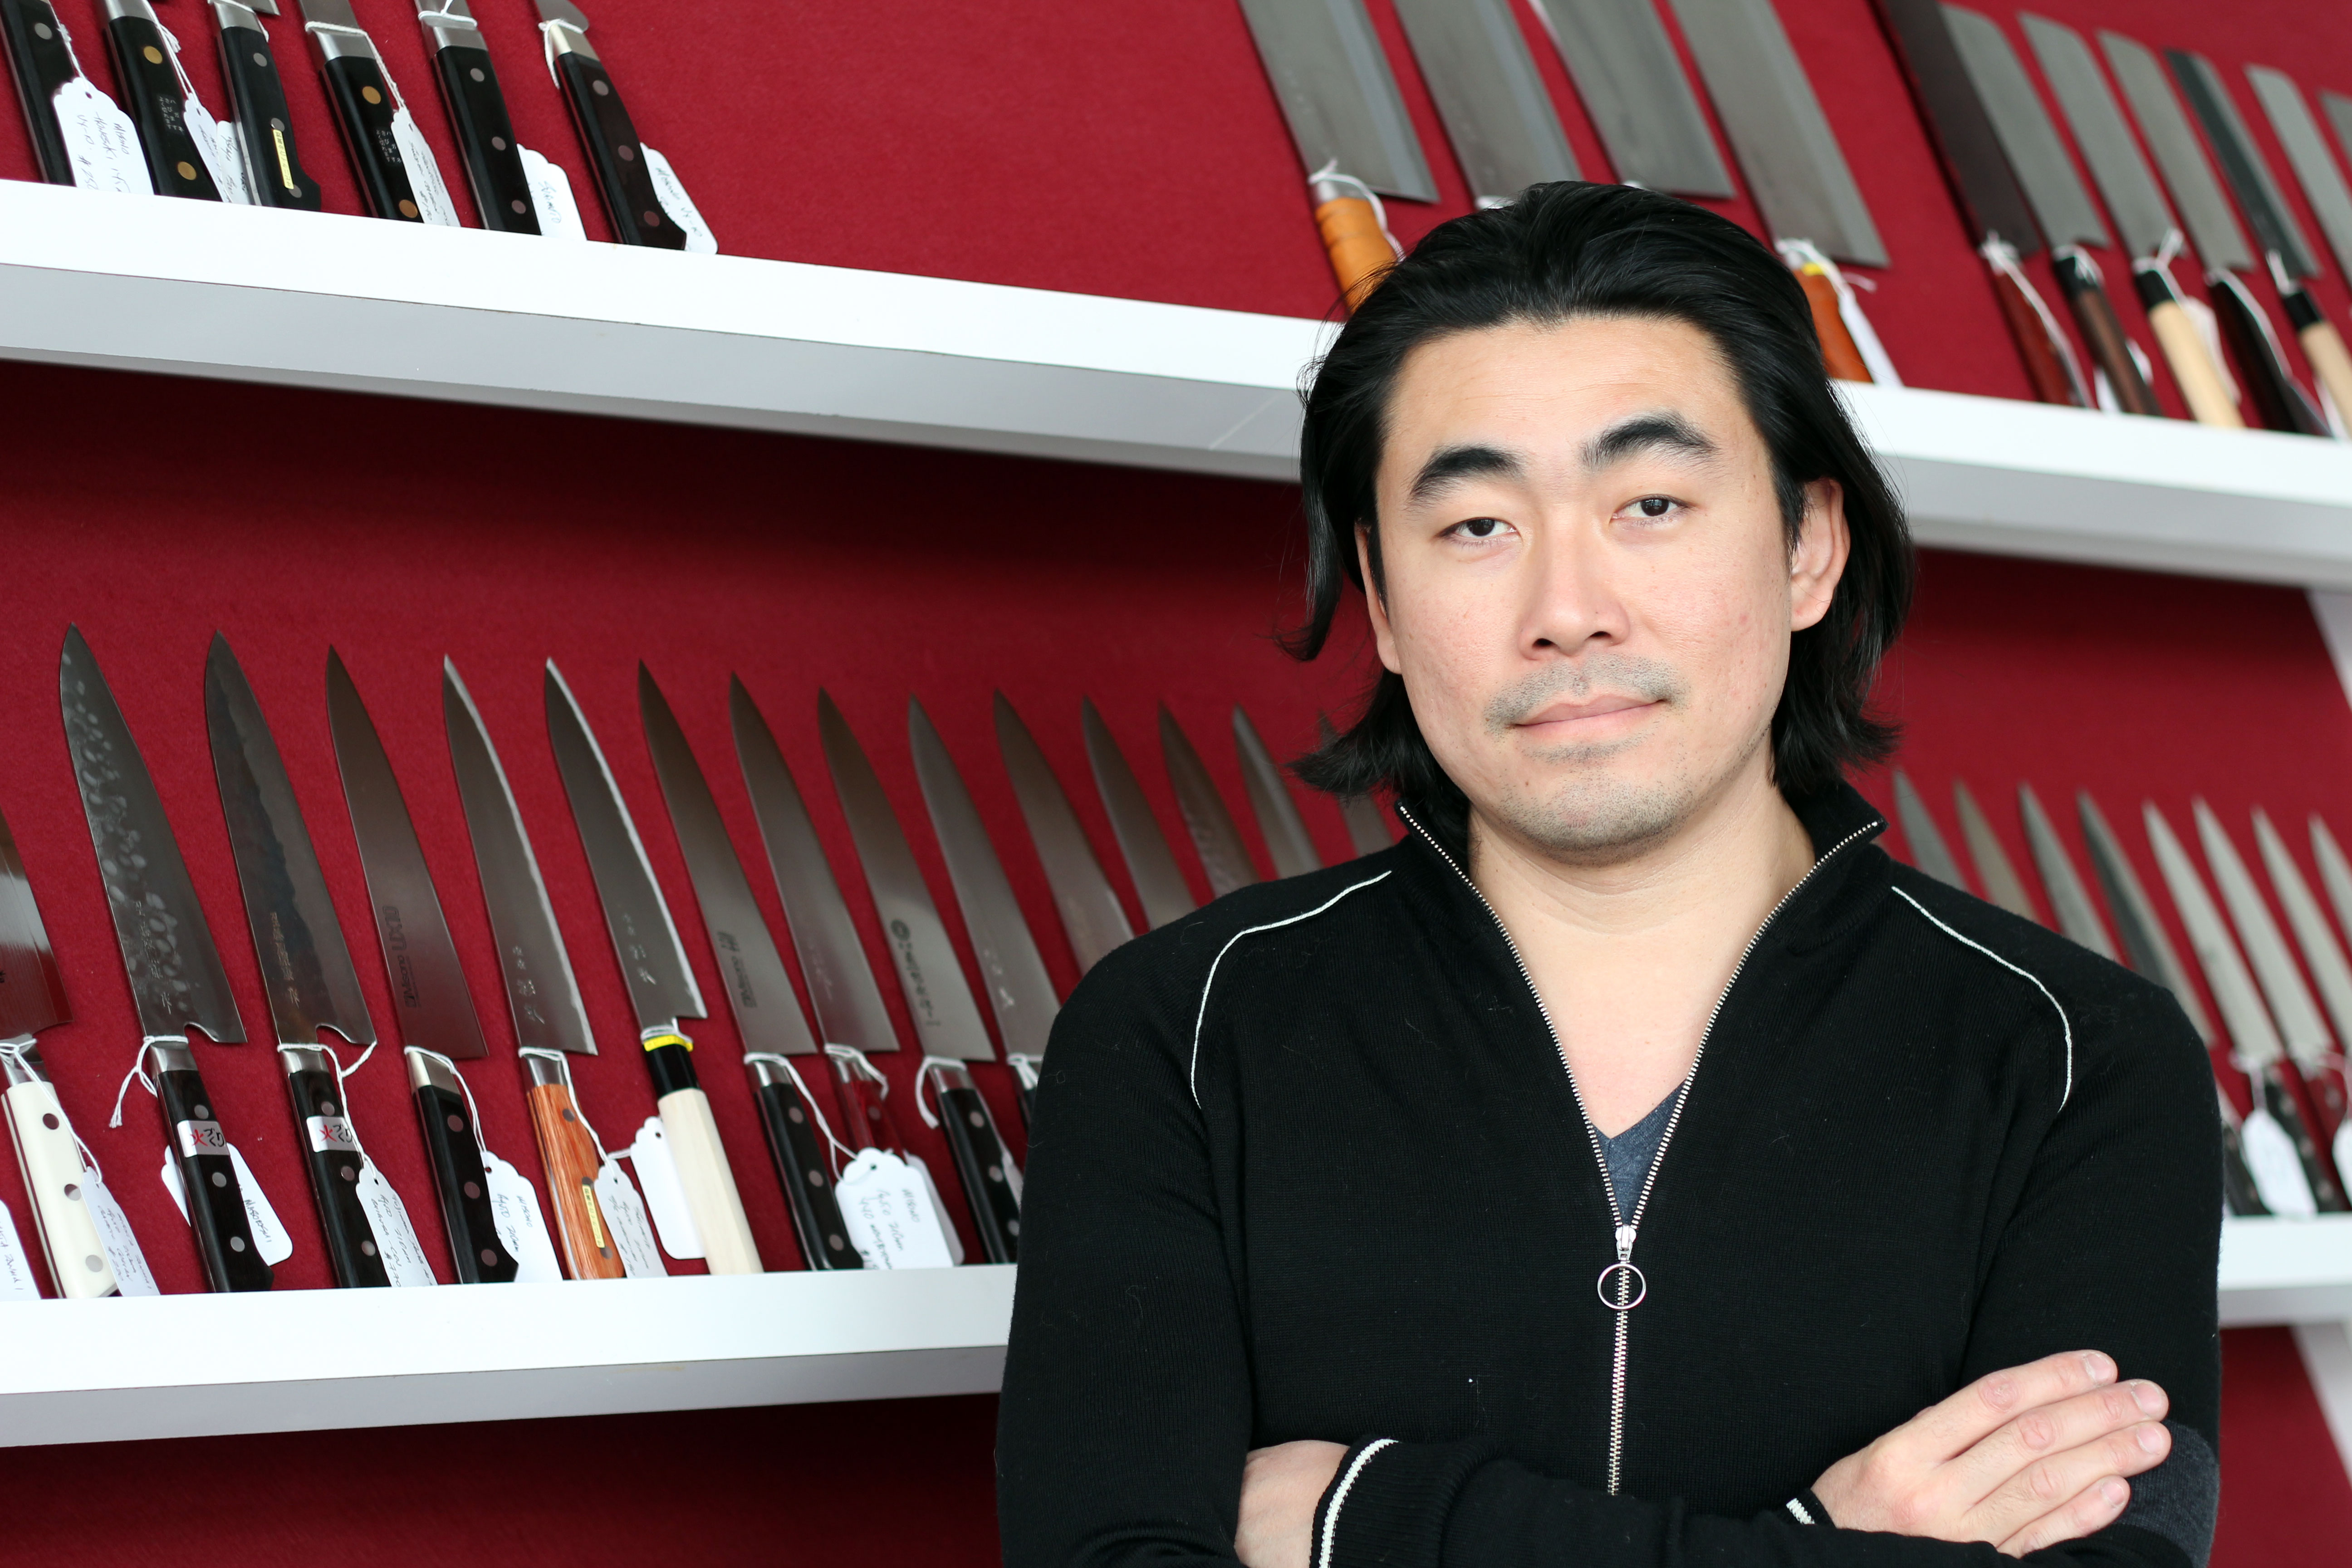 Eugene Ong, seen here, has been the owner of KNIFE for four years. His love for knives comes from twelve years spent as a chef and knowing how important a sharp blade is to own.